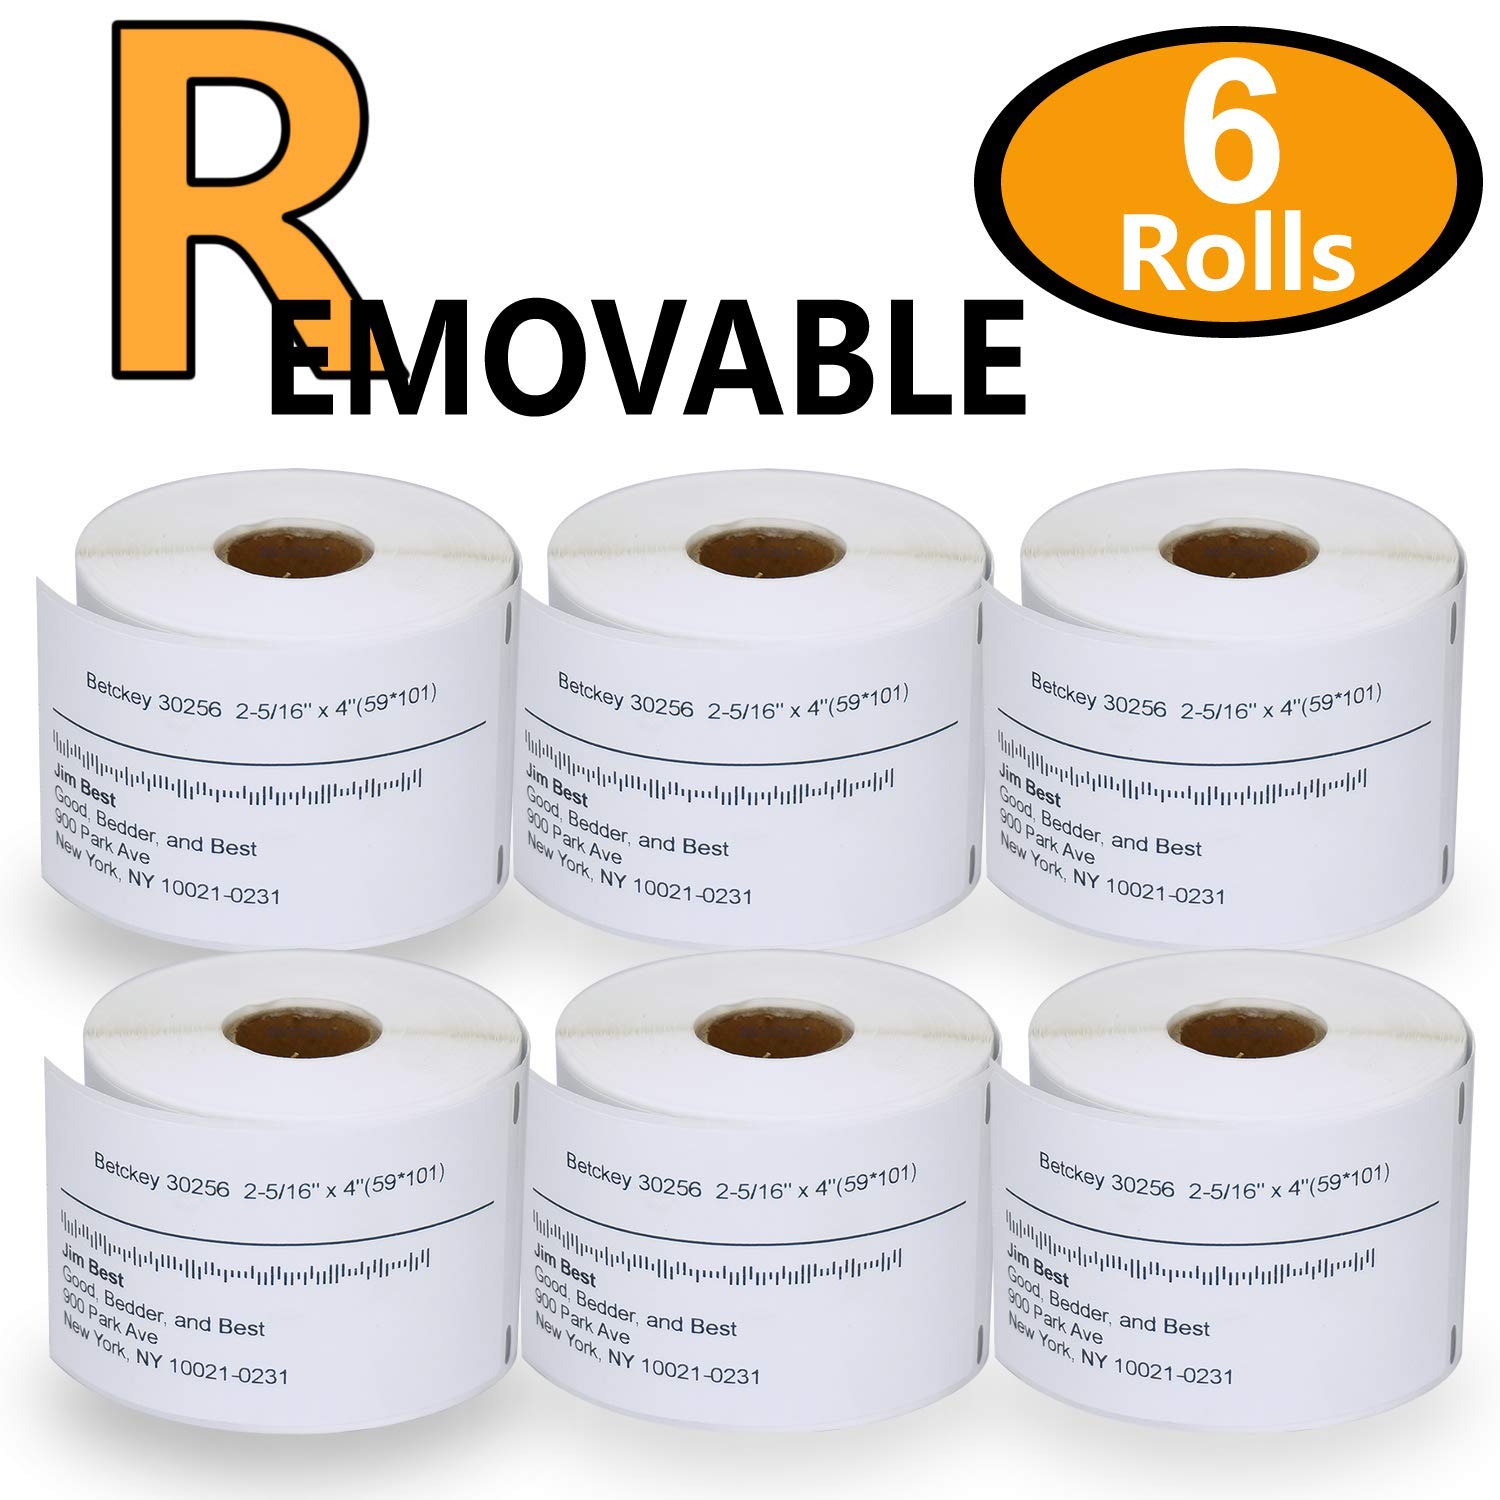 BETCKEY - Compatible DYMO 30256 (2-5/16" x 4" Removable) Shipping Labels - Compatible with Rollo, DYMO Labelwriter 450, 4XL & Zebra Desktop Printers[6 Rolls/1800 Labels]